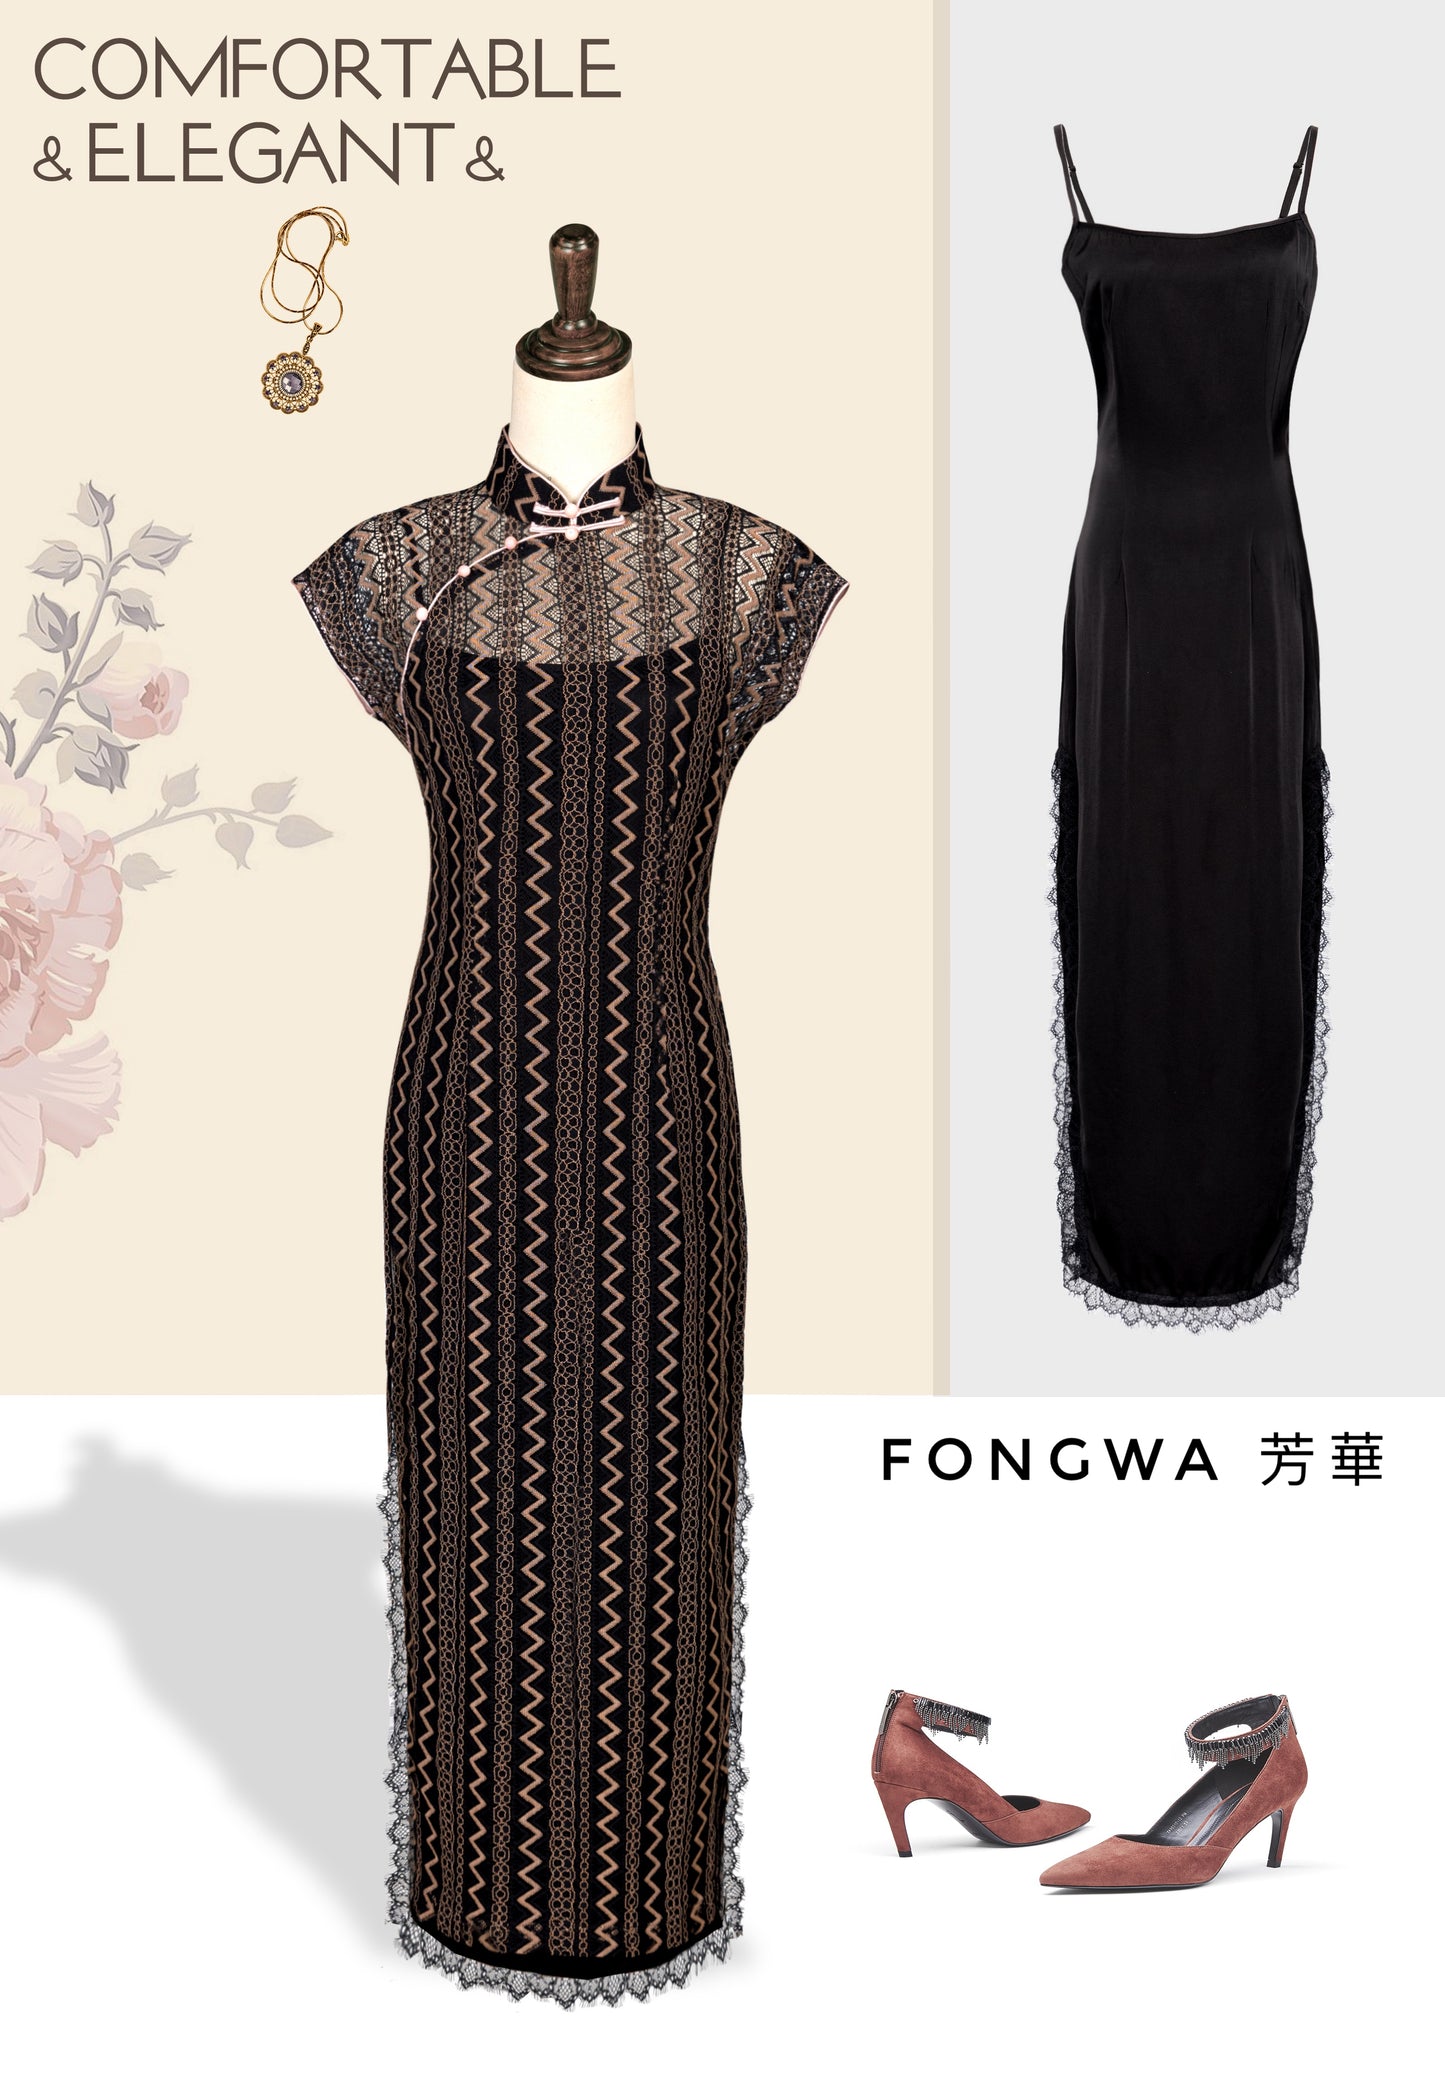 New Chinese-style Cheongsam, Daily Wear Cheongsam,  Independent Design Studio for New Chinese-style Clothing